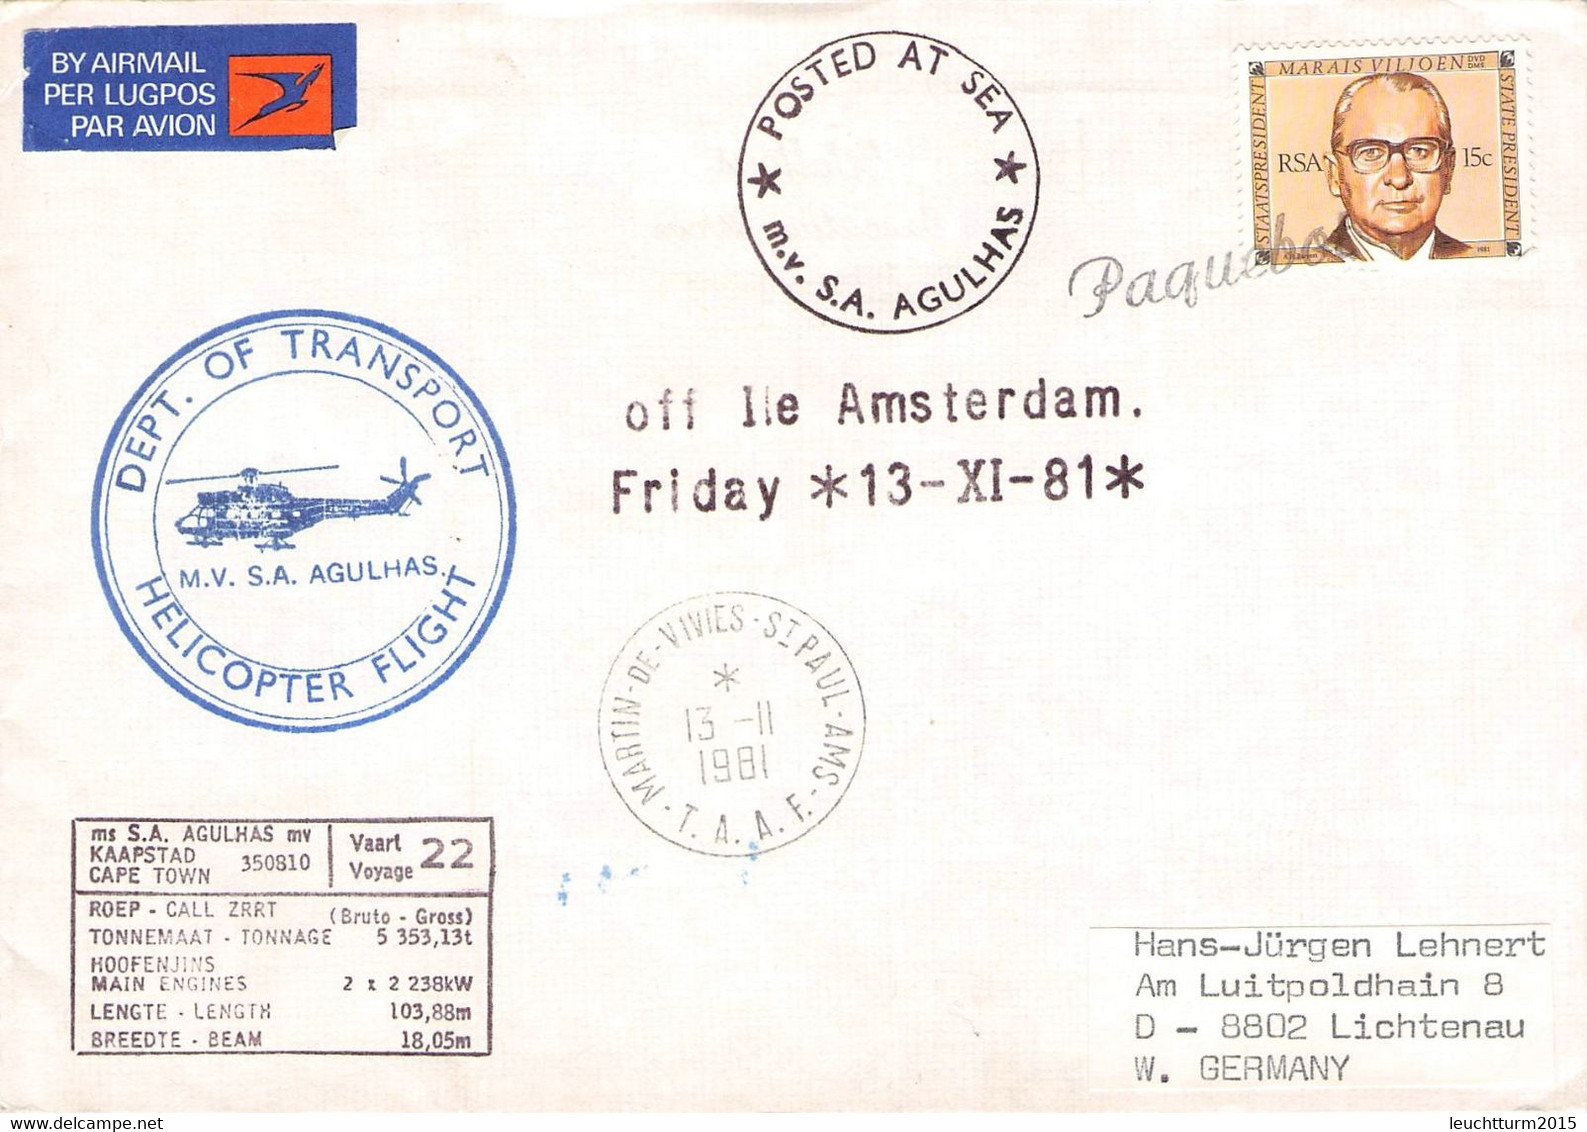 SOUTH AFRICA - POSTED AT SEA MV S.A. AGULHAS 1981 > GERMANY / ZM275 - Covers & Documents